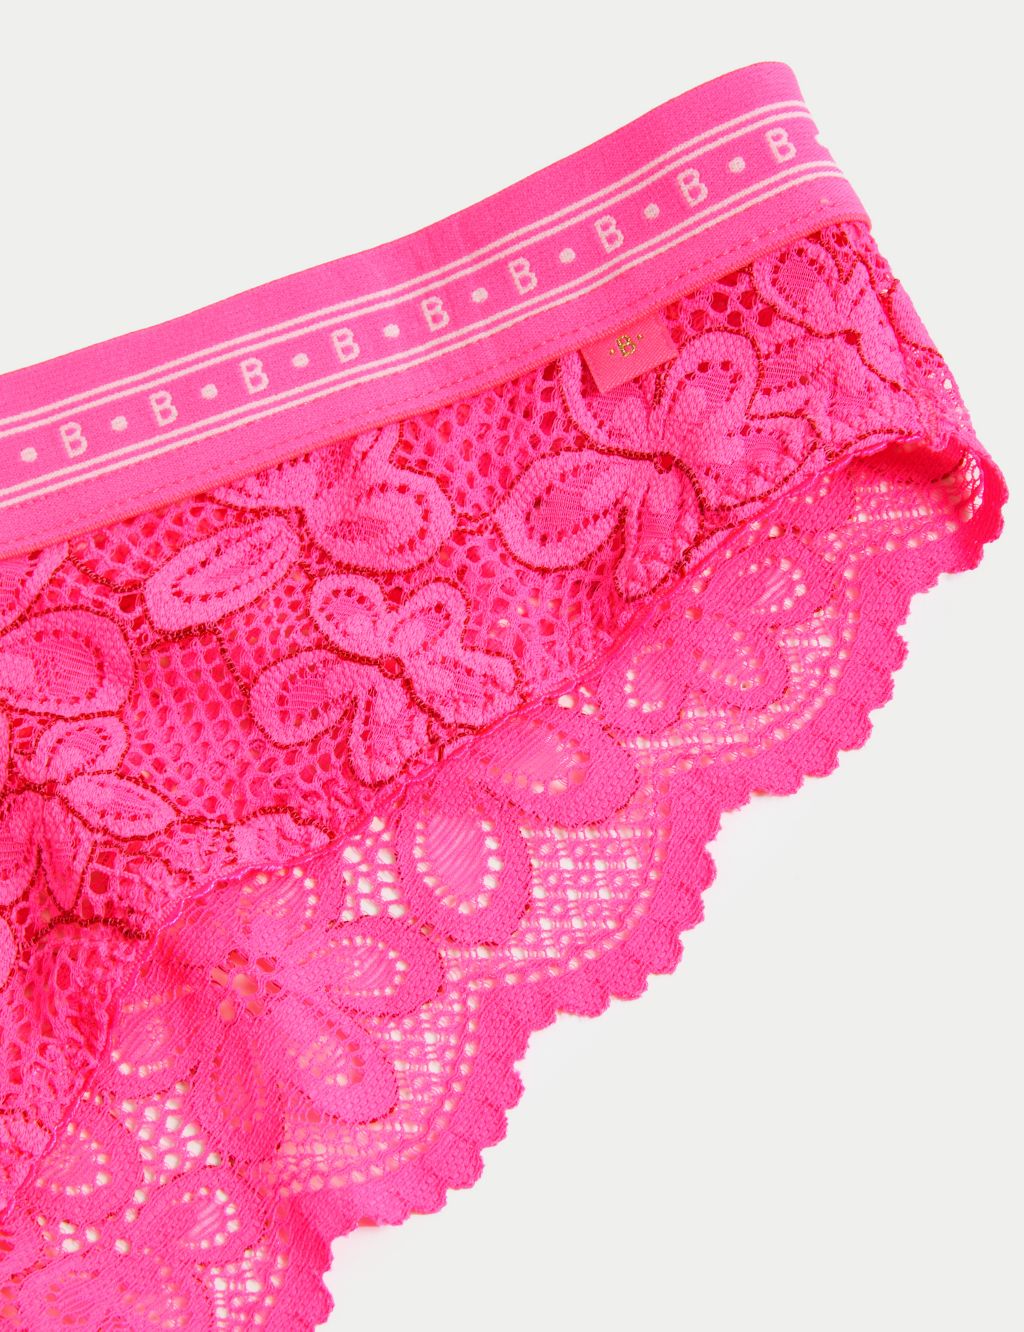 Cleo Lace Miami Knickers image 6